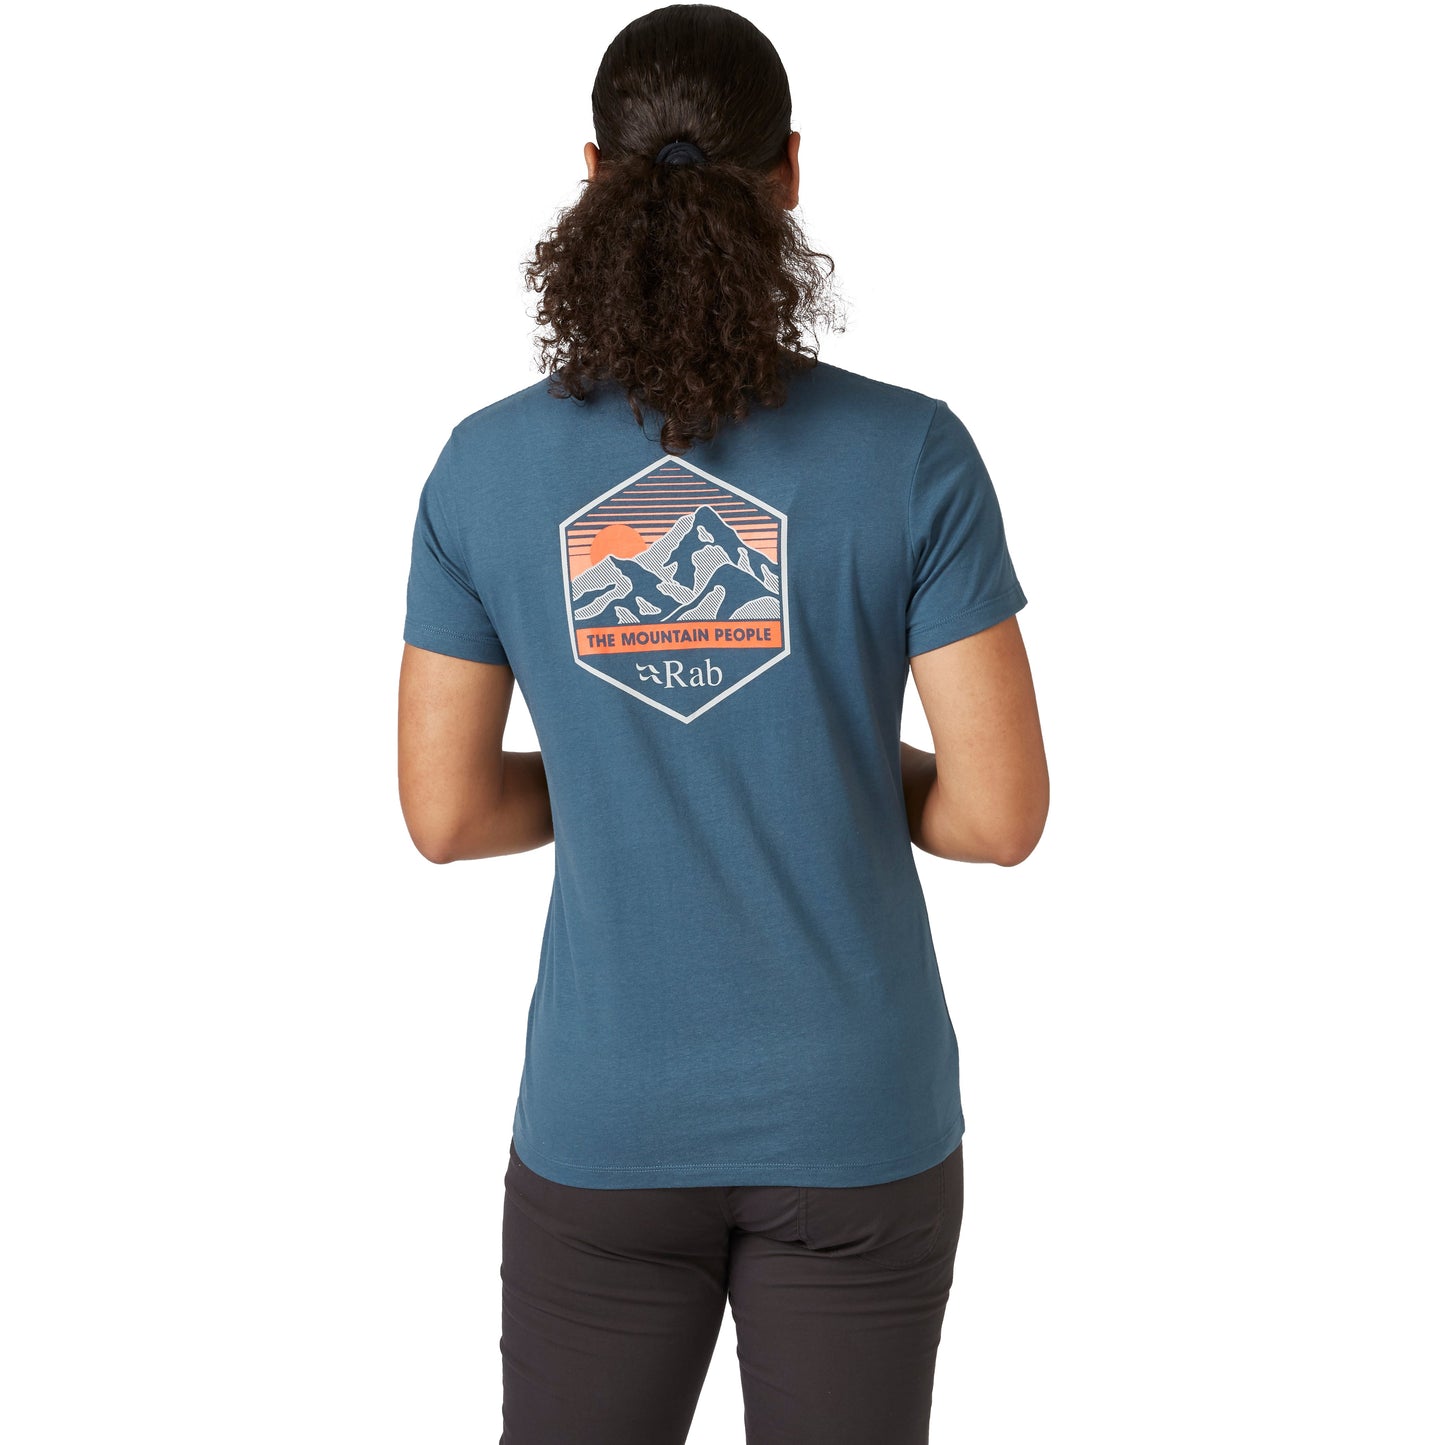 Rab womens stance mountain t shirt orion blue